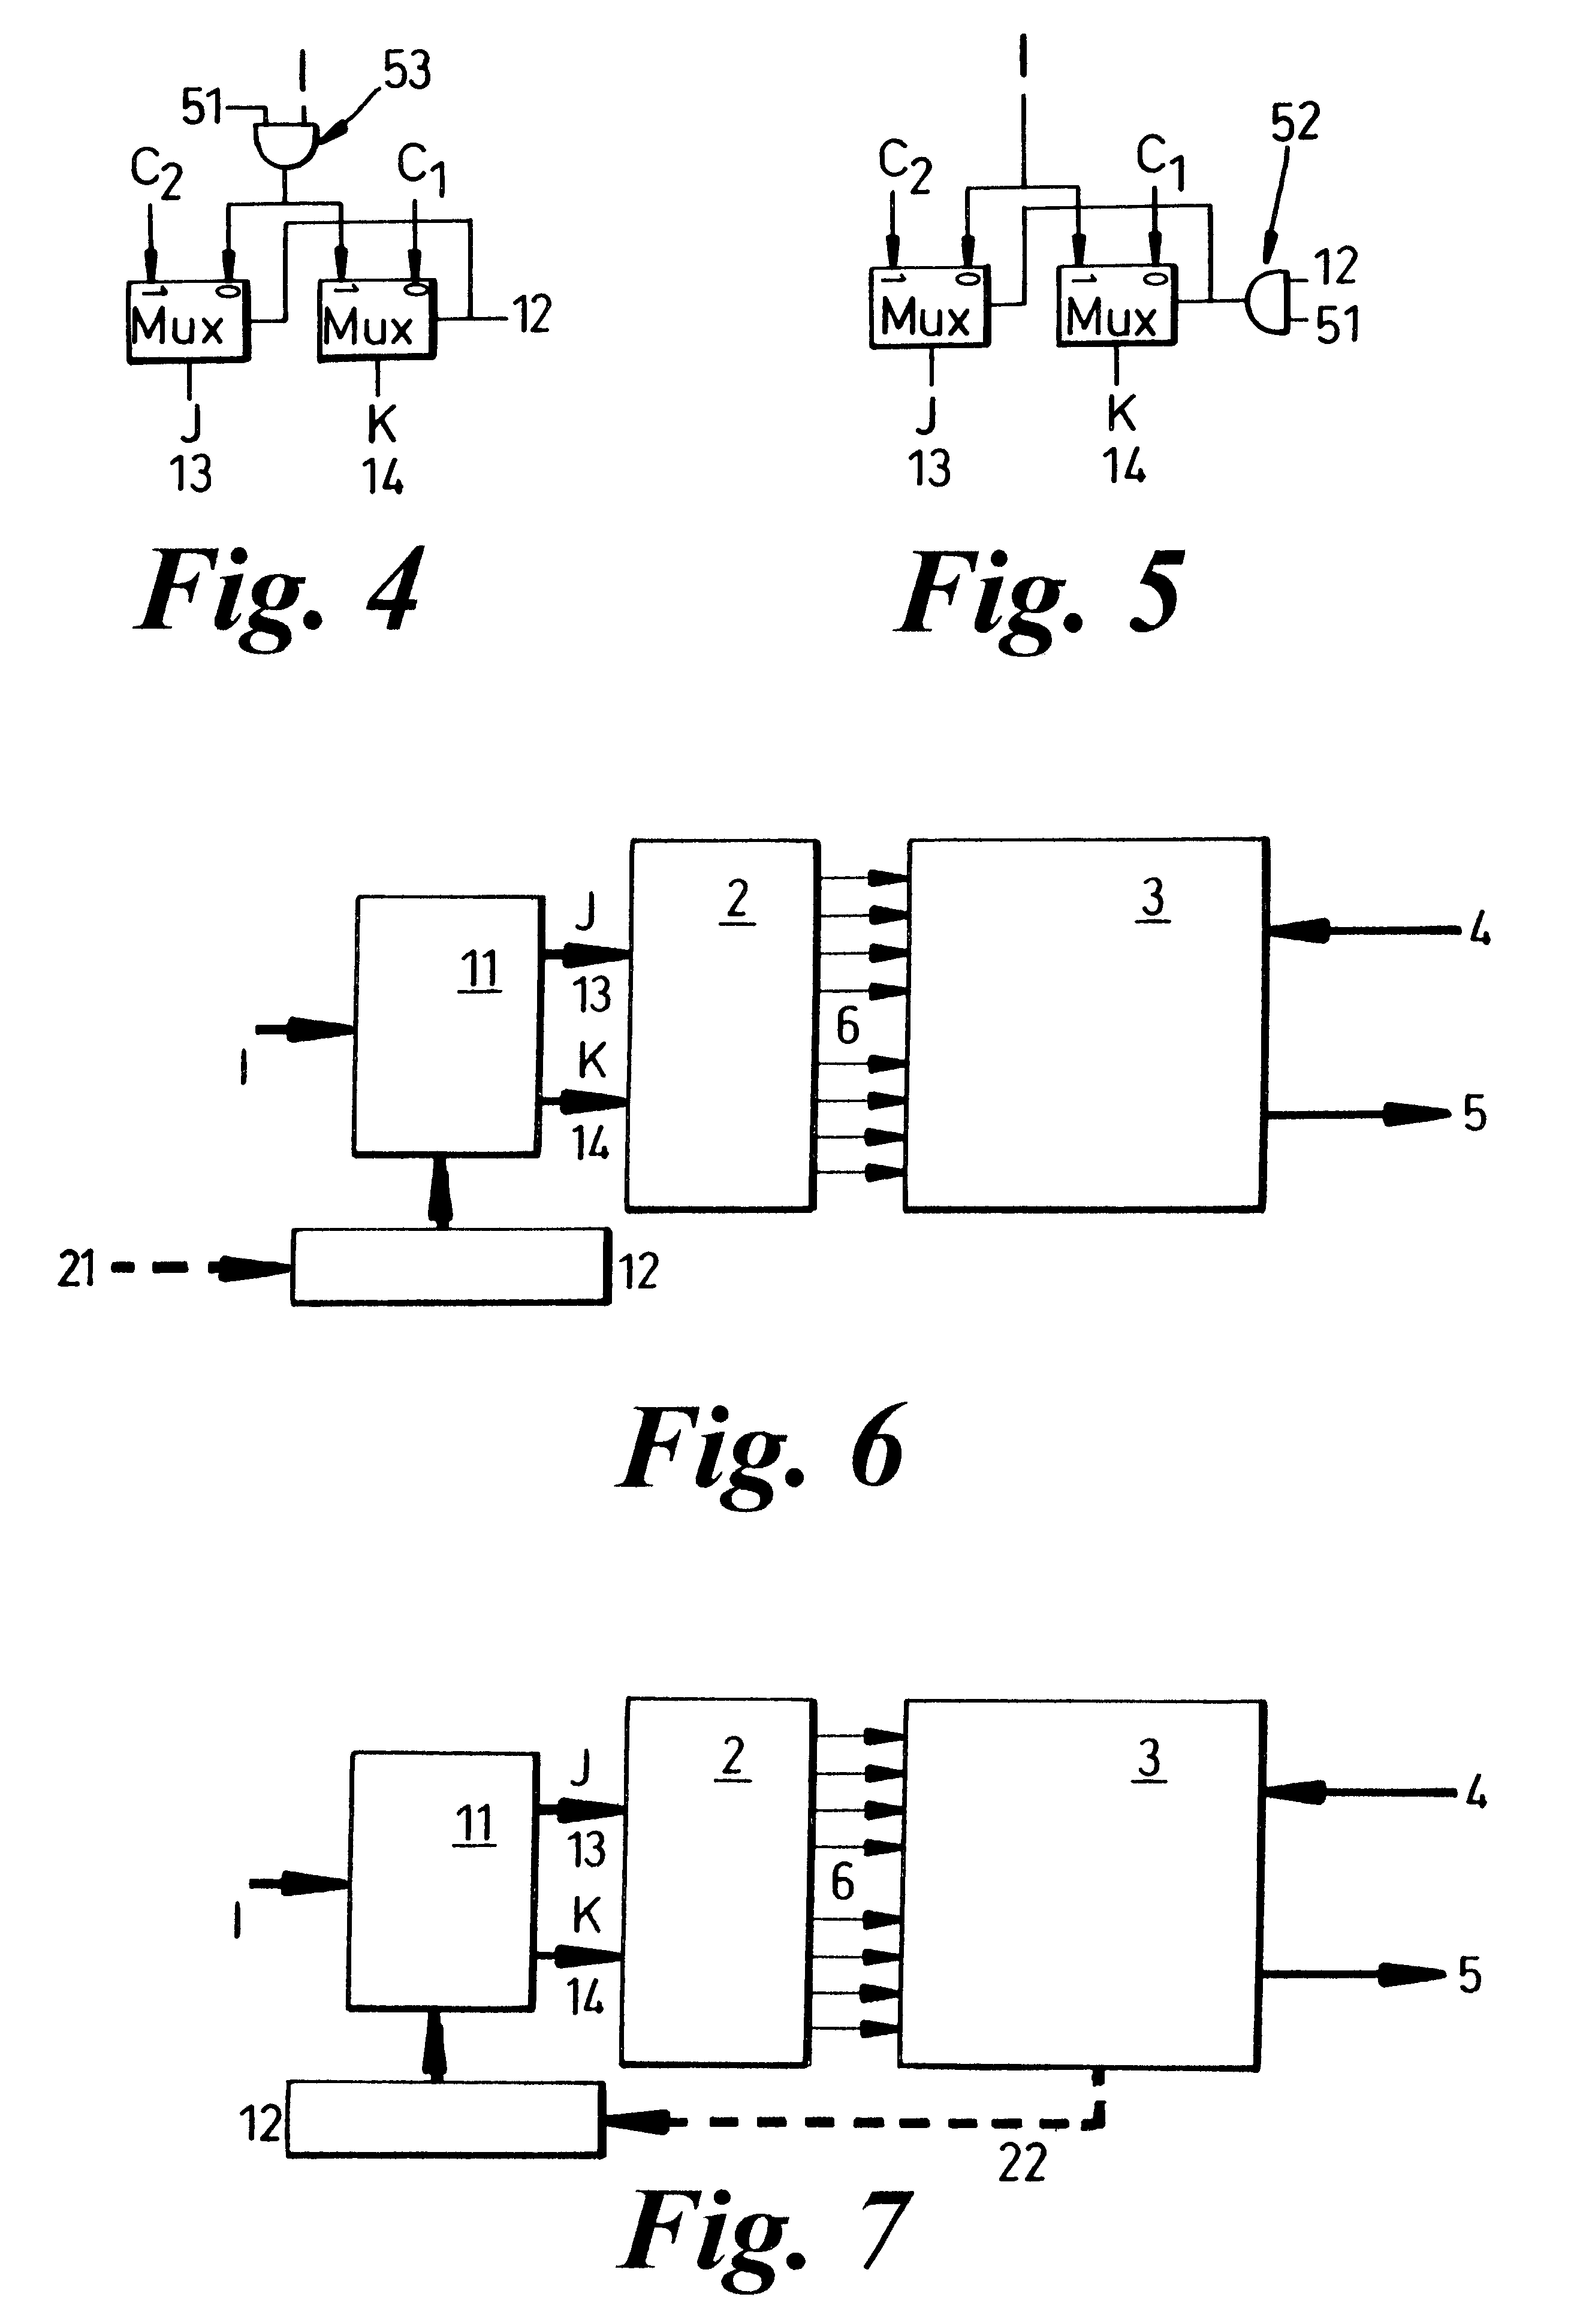 Method and apparatus for providing instruction streams to a processing device